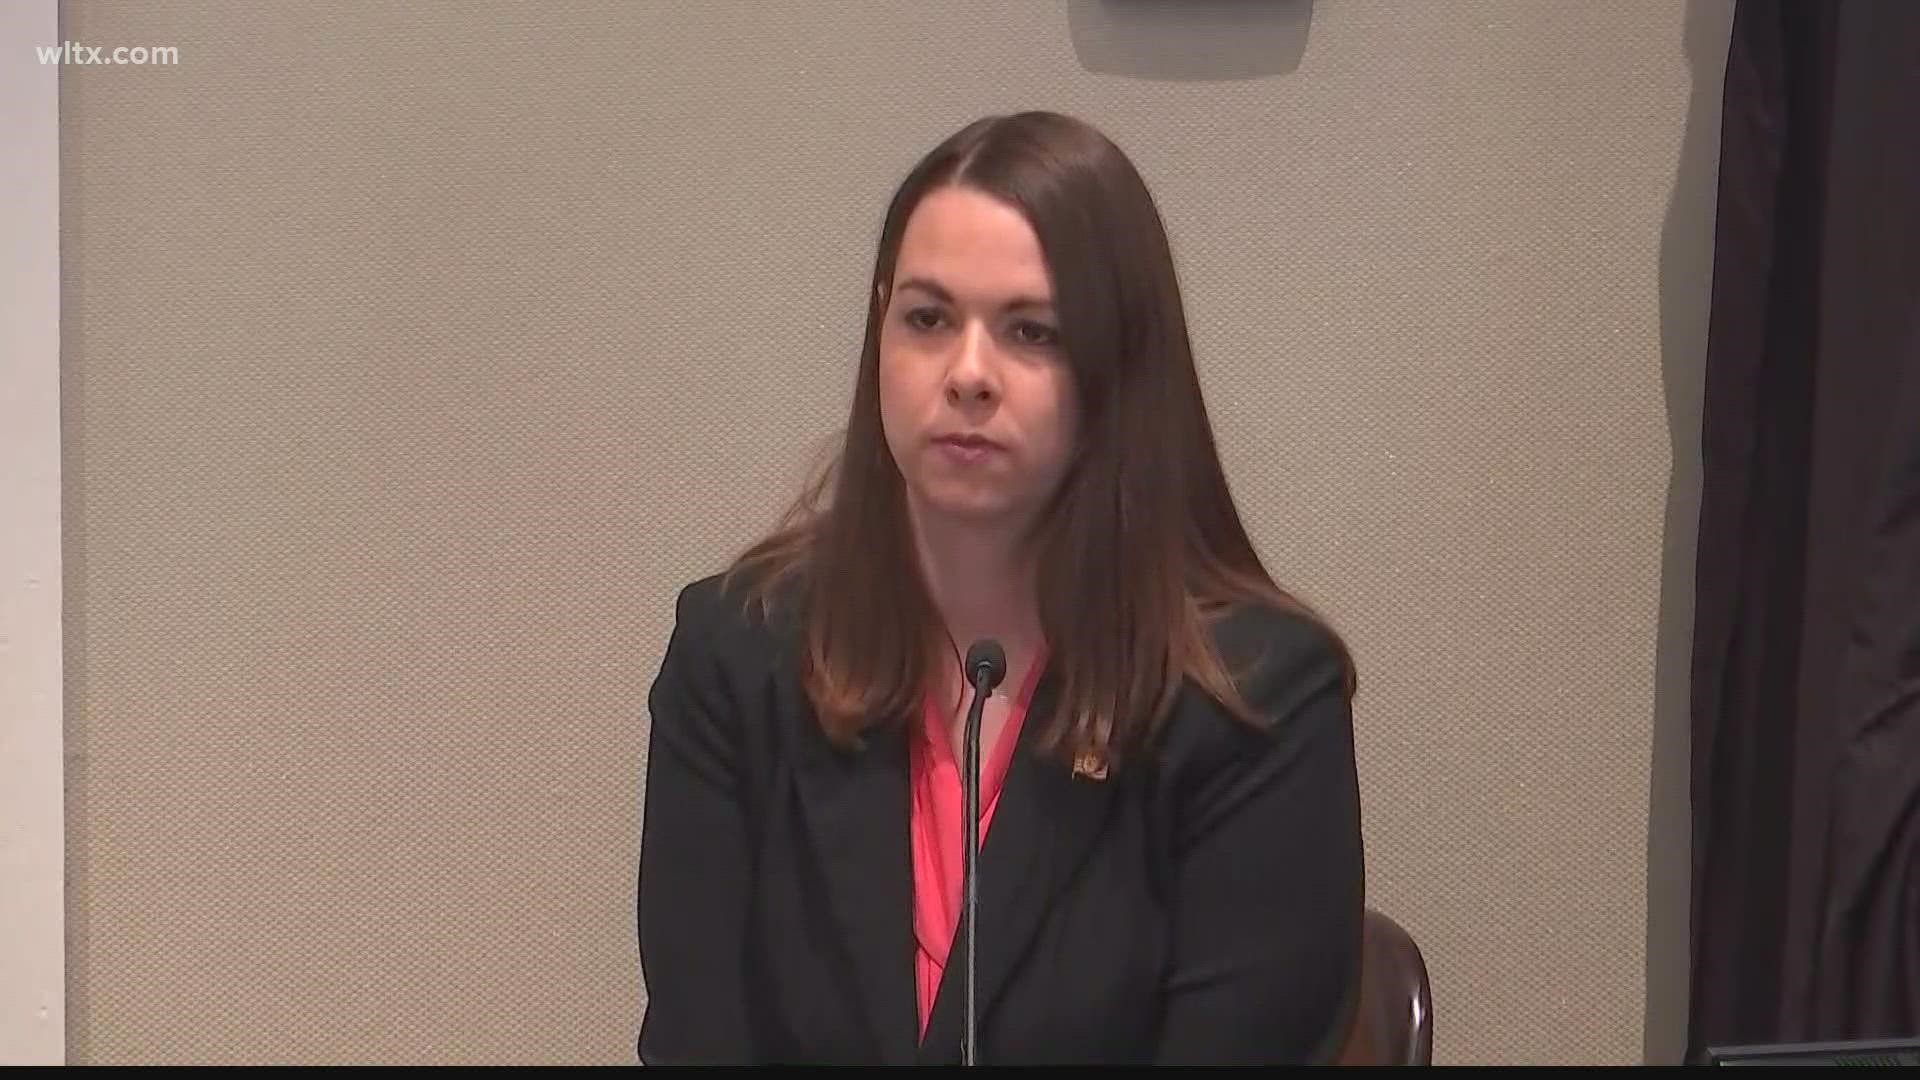 Detective Laura Rutland says she observed no blood on Alex Murdaugh on the night of the killing. Murdaugh is charged with killing his wife and son in South Carolina.